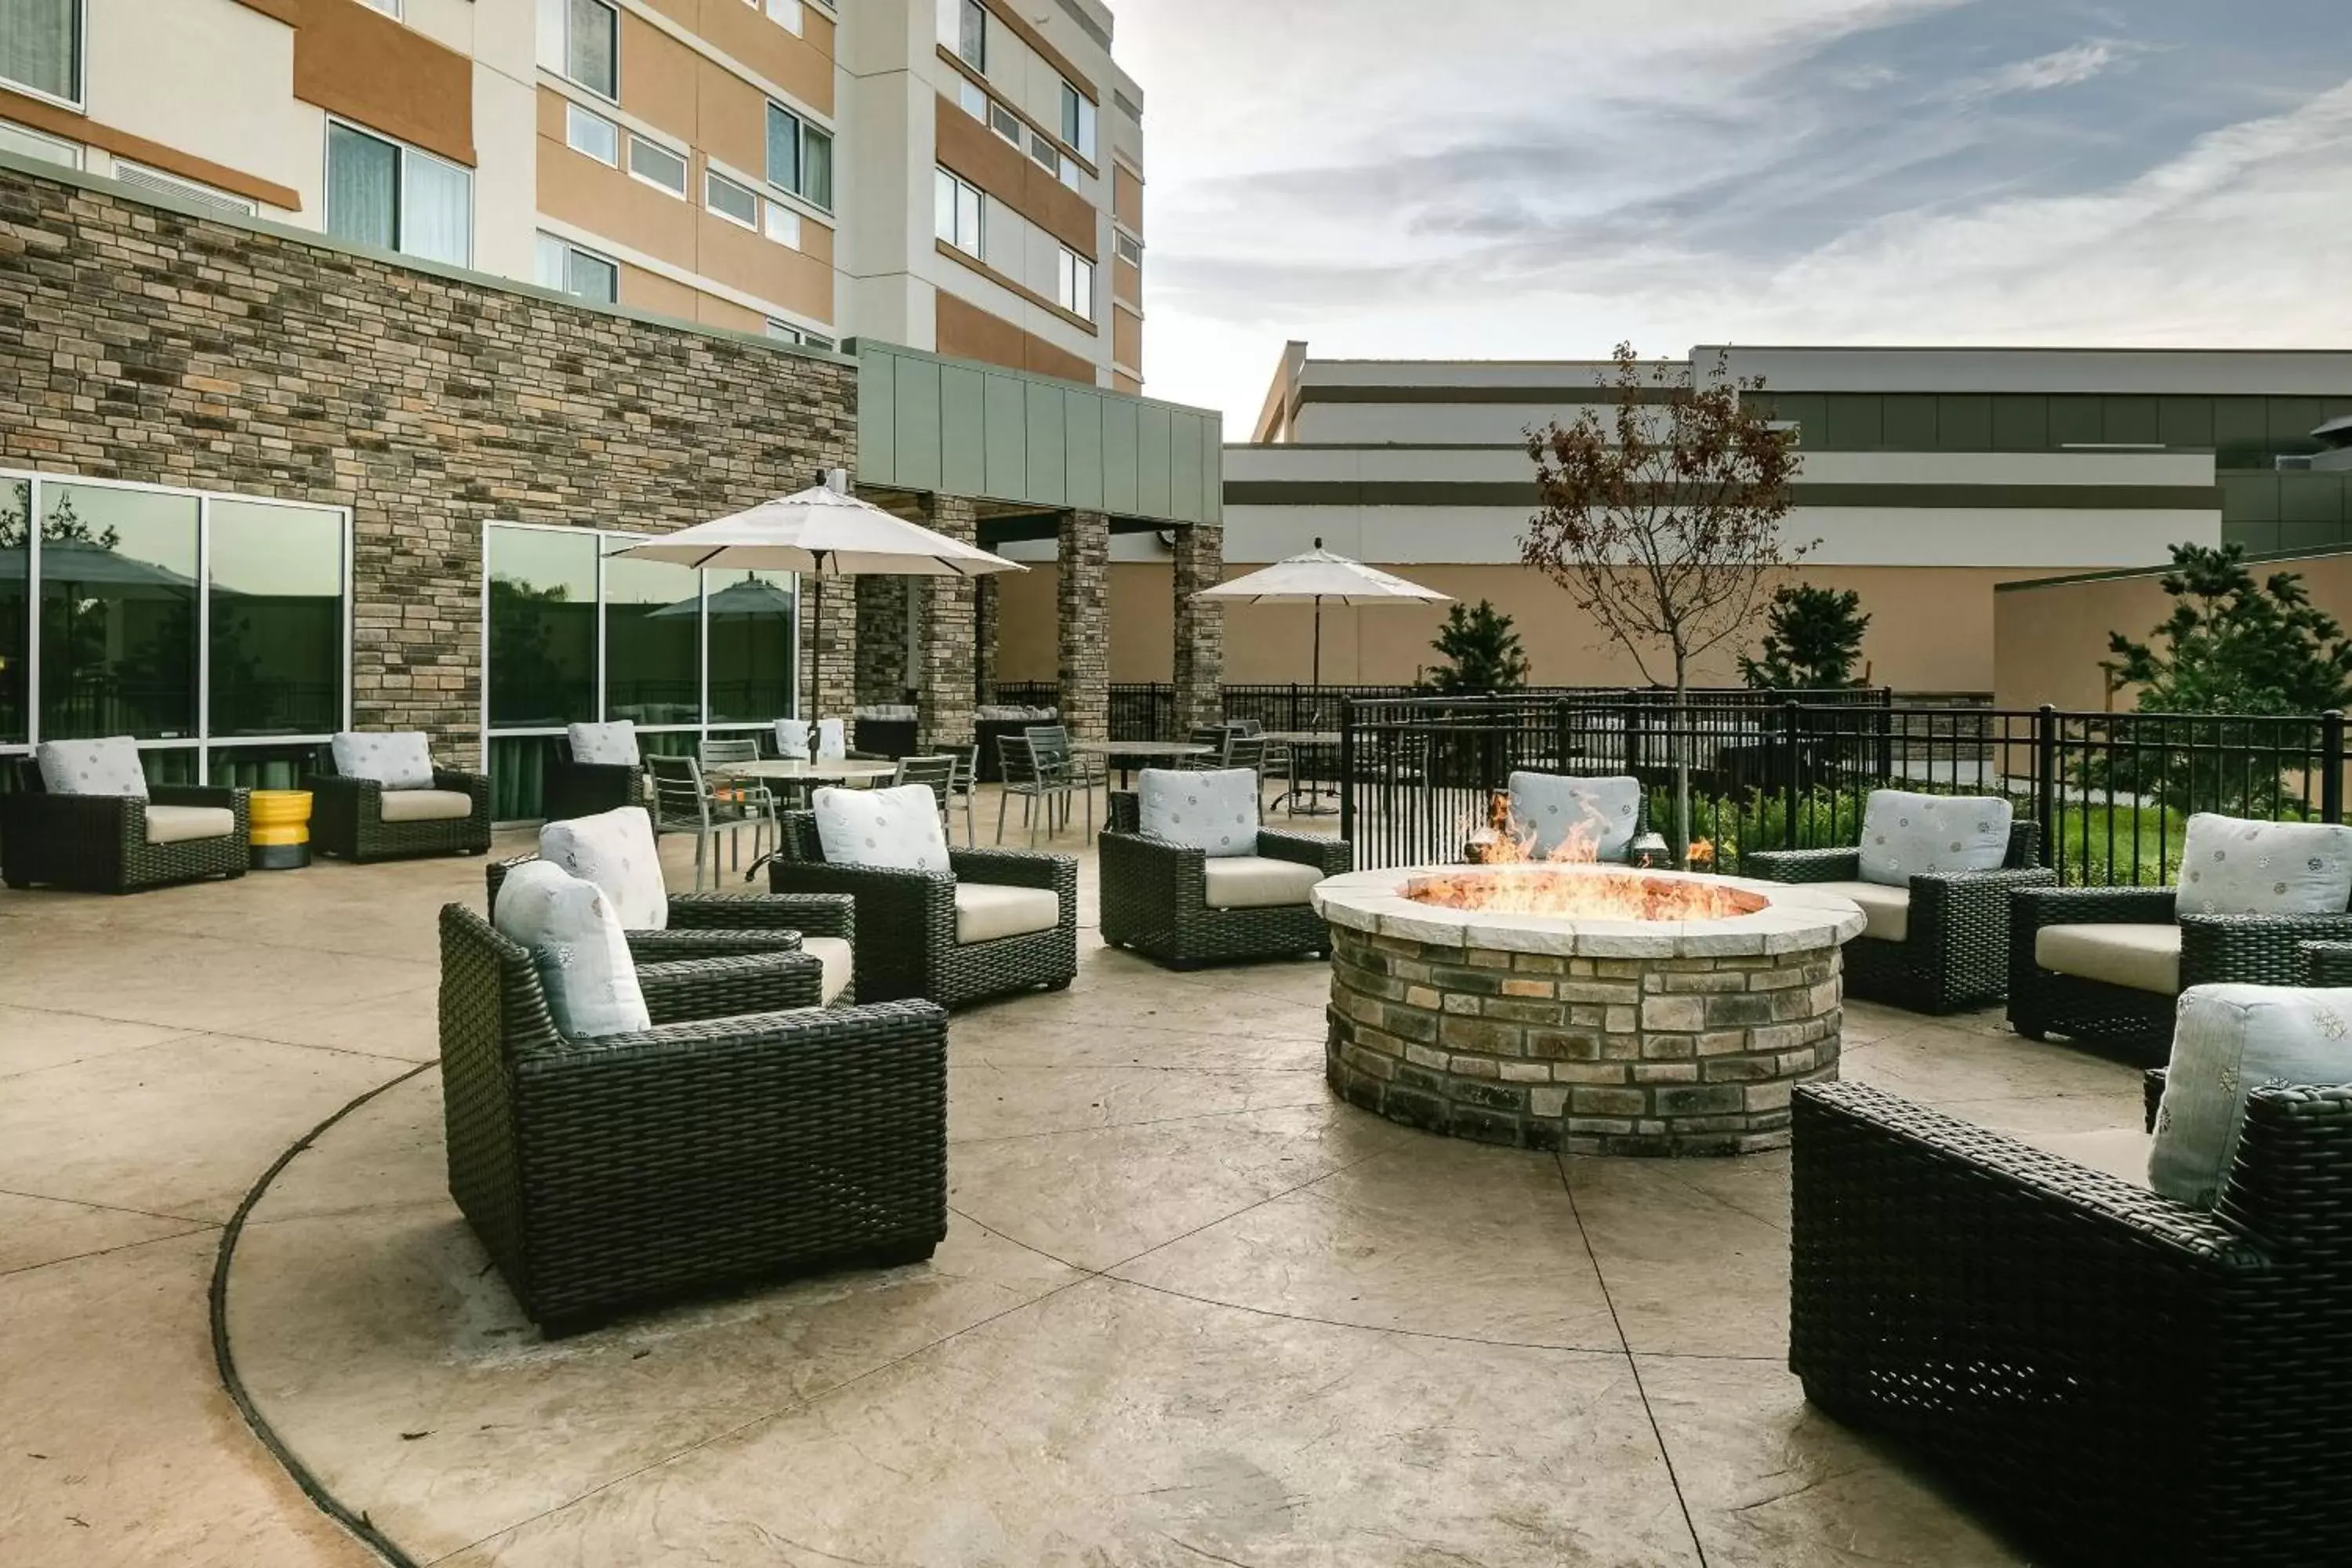 Property building in Courtyard by Marriott Omaha Bellevue at Beardmore Event Center